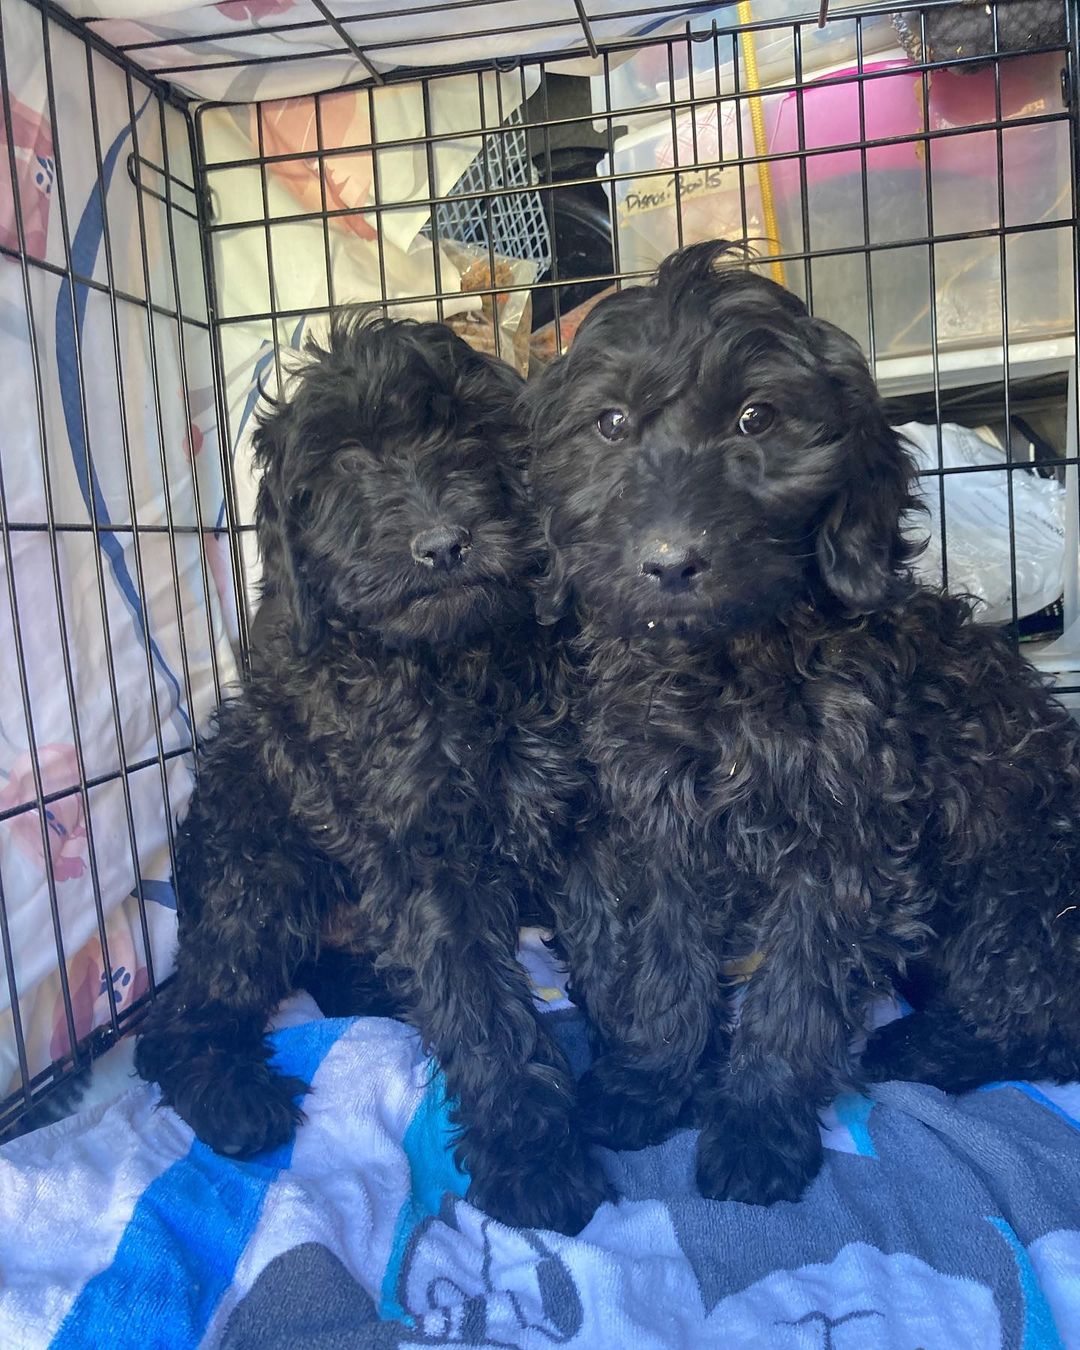 The Great Plains SPCA HERO Team continues to provide lifesaving services & second chances for pets in the community, like these two Doodle puppies when their owners needed placement for them. ❤️

On this <a target='_blank' href='https://www.instagram.com/explore/tags/GivingTuesday/'>#GivingTuesday</a>, DONATE to have your impact MATCHED so faces like this can be saved. 🐾 <a target='_blank' href='https://www.instagram.com/explore/tags/donate/'>#donate</a> <a target='_blank' href='https://www.instagram.com/explore/tags/doodles/'>#doodles</a> <a target='_blank' href='https://www.instagram.com/explore/tags/puppies/'>#puppies</a> <a target='_blank' href='https://www.instagram.com/explore/tags/heroteam/'>#heroteam</a> <a target='_blank' href='https://www.instagram.com/explore/tags/outreach/'>#outreach</a> <a target='_blank' href='https://www.instagram.com/explore/tags/greatplainsspca/'>#greatplainsspca</a> <a target='_blank' href='https://www.instagram.com/explore/tags/greatplainsfamily/'>#greatplainsfamily</a>